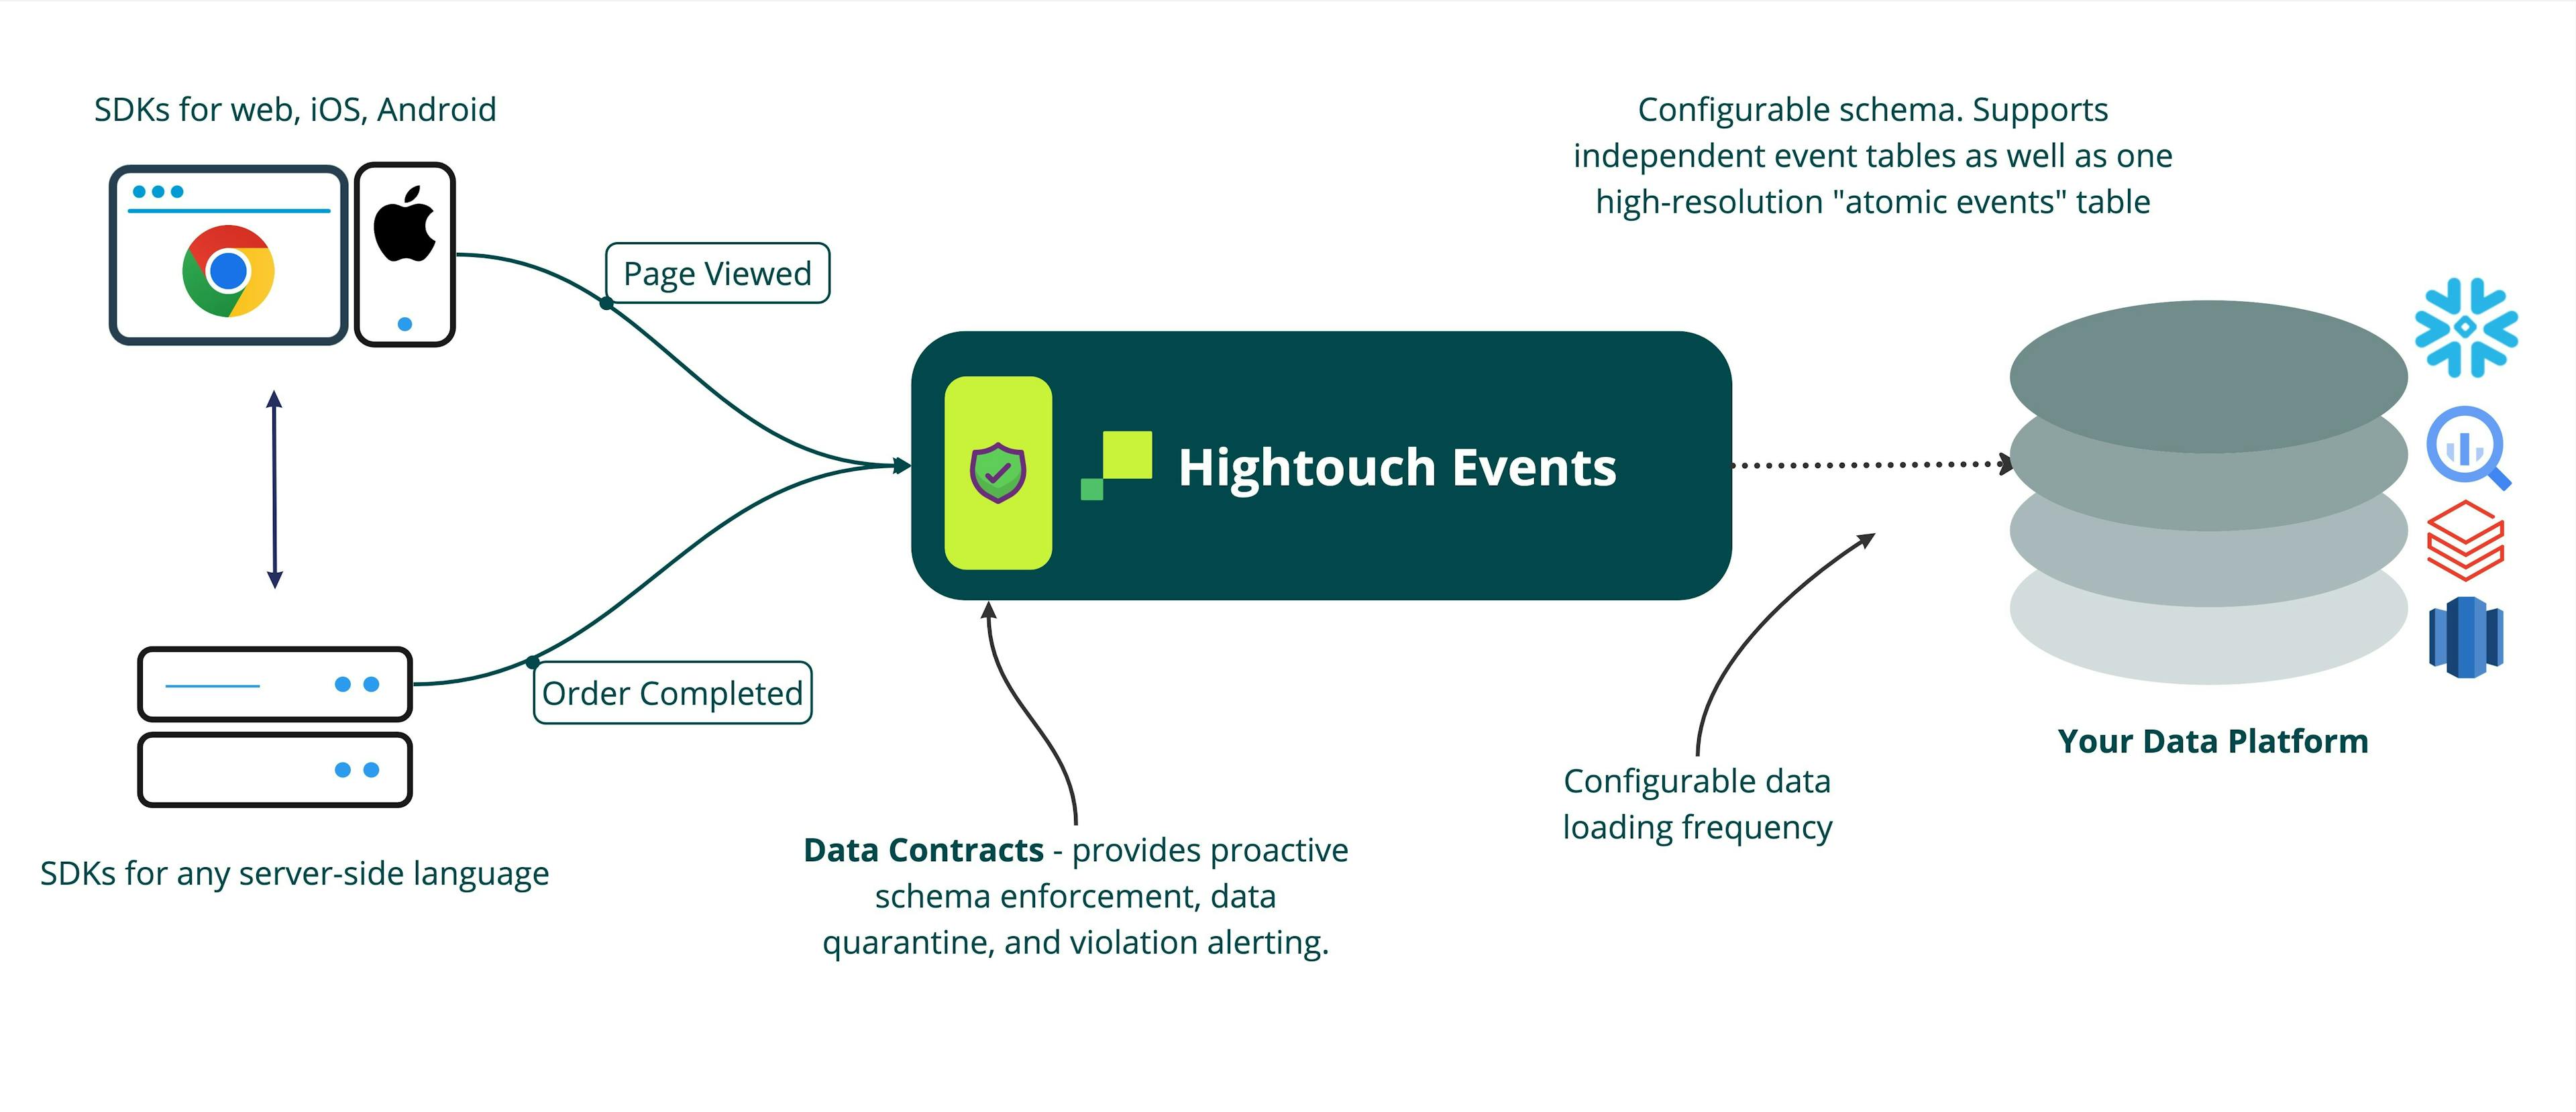 Hightouch Events